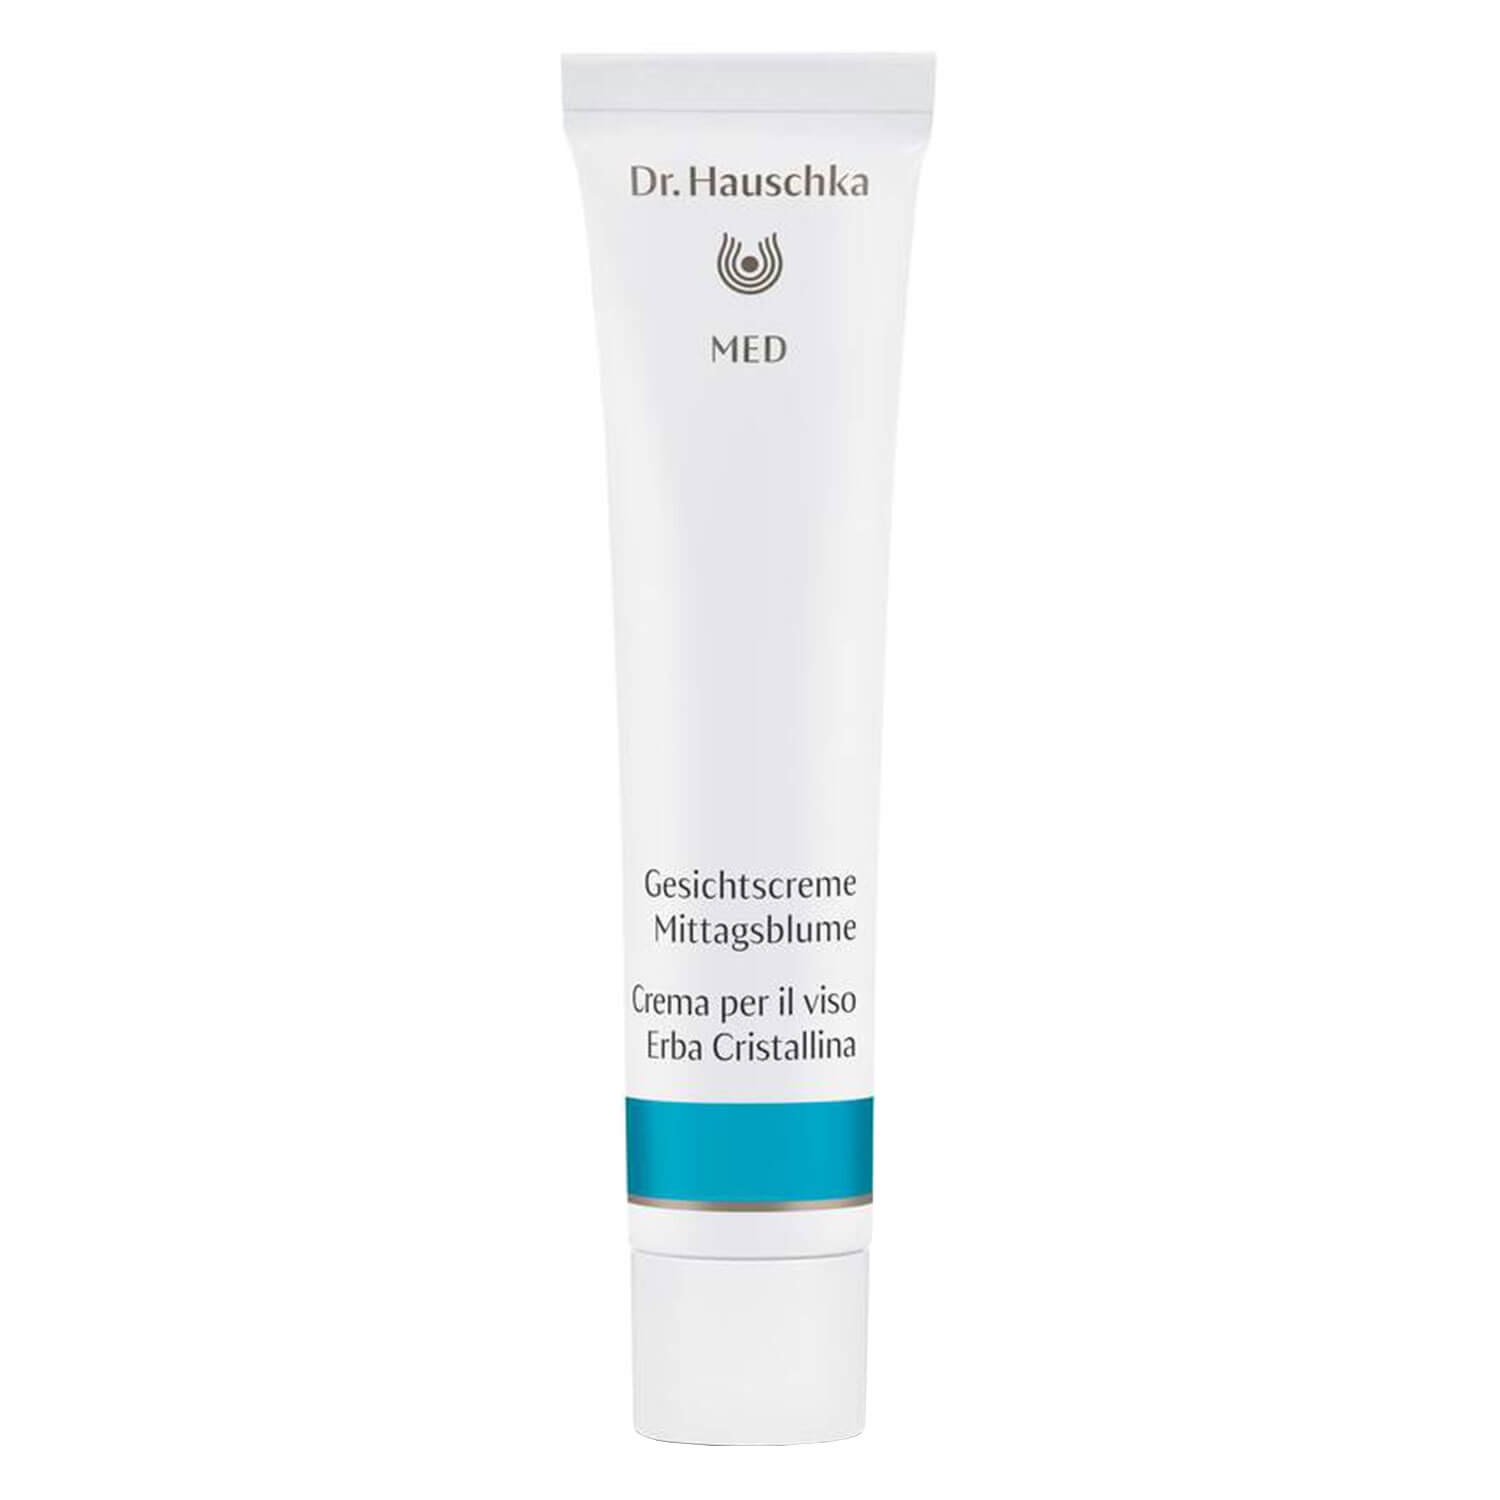 Product image from Dr. Hauschka MED - Gesichtscreme Mittagsblume